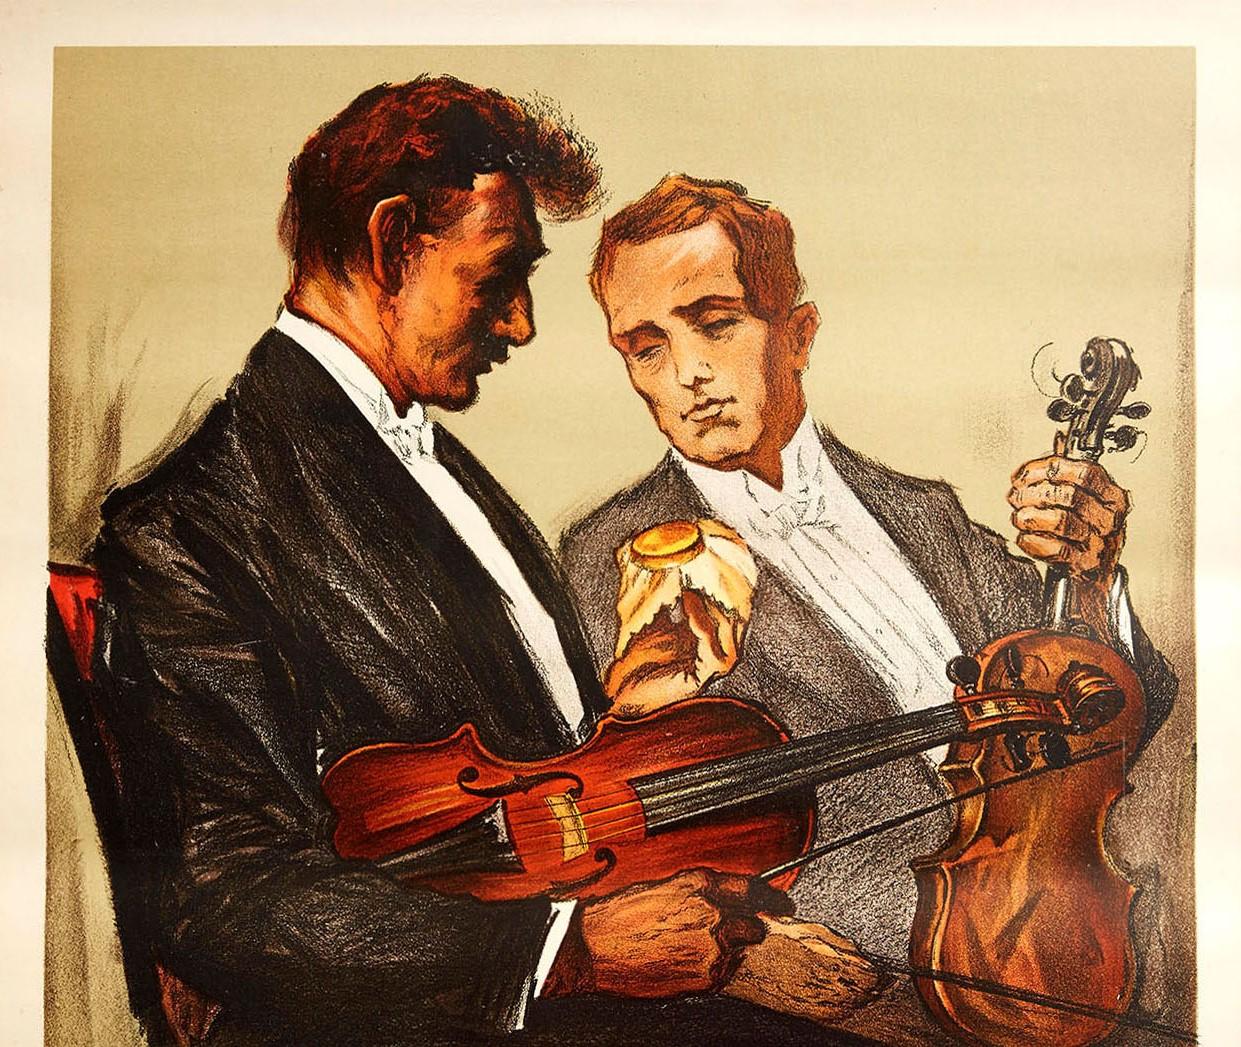 Original vintage poster featuring great artwork of two musicians in smart suits holding their violins with one man holding his dull looking violin and admiring the shiny waxed violin of the other, achieved by using the pot of wood wax being